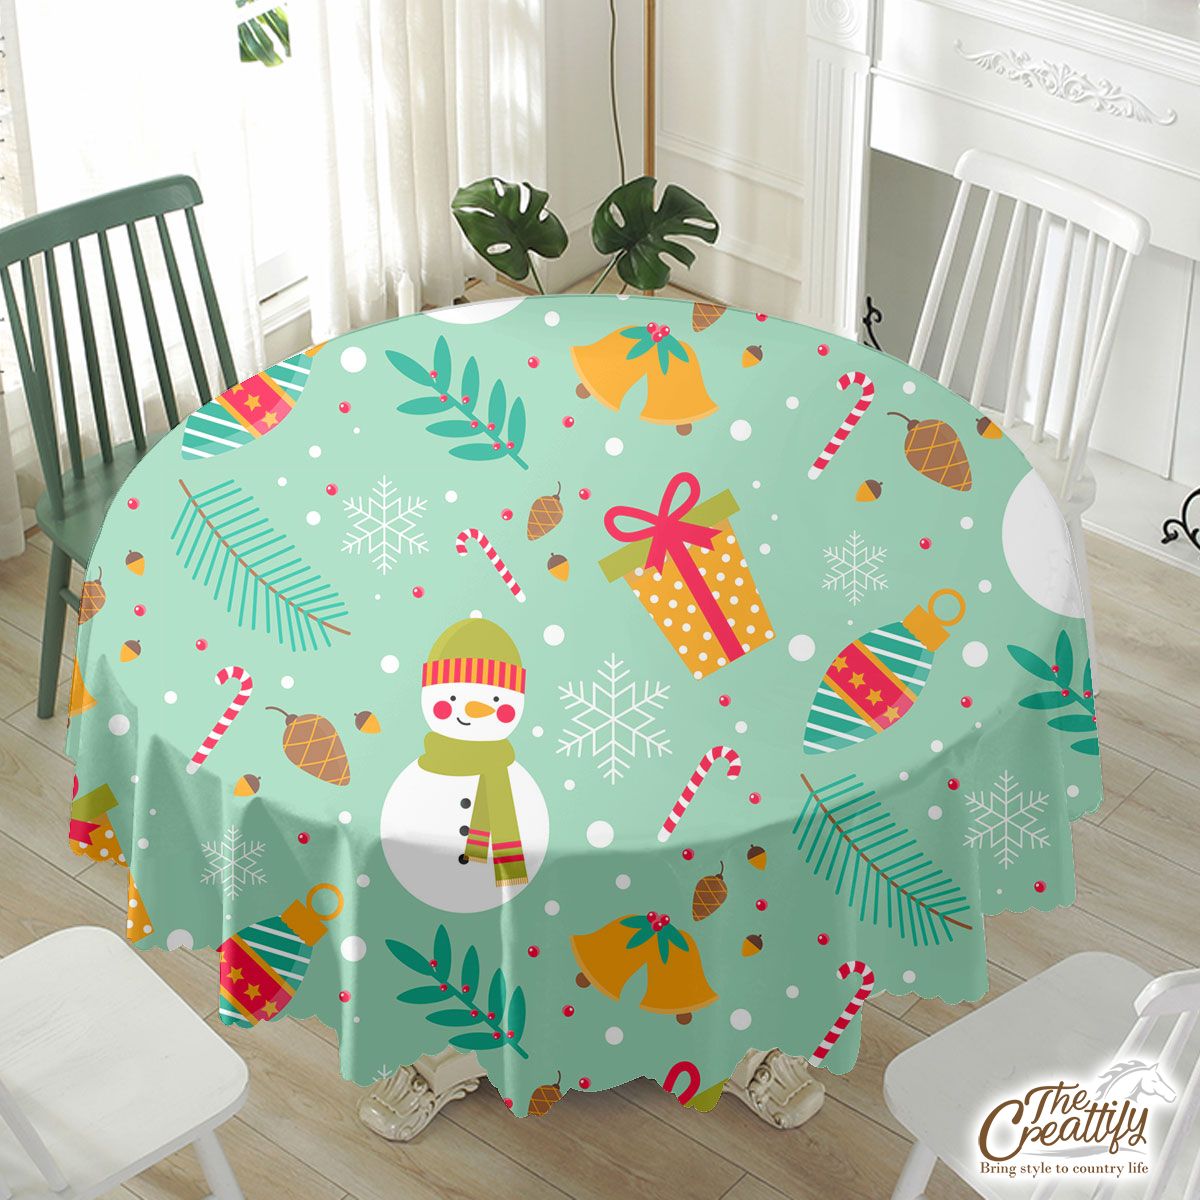 Snowman With Christmas Bells Pattern Waterproof Tablecloth